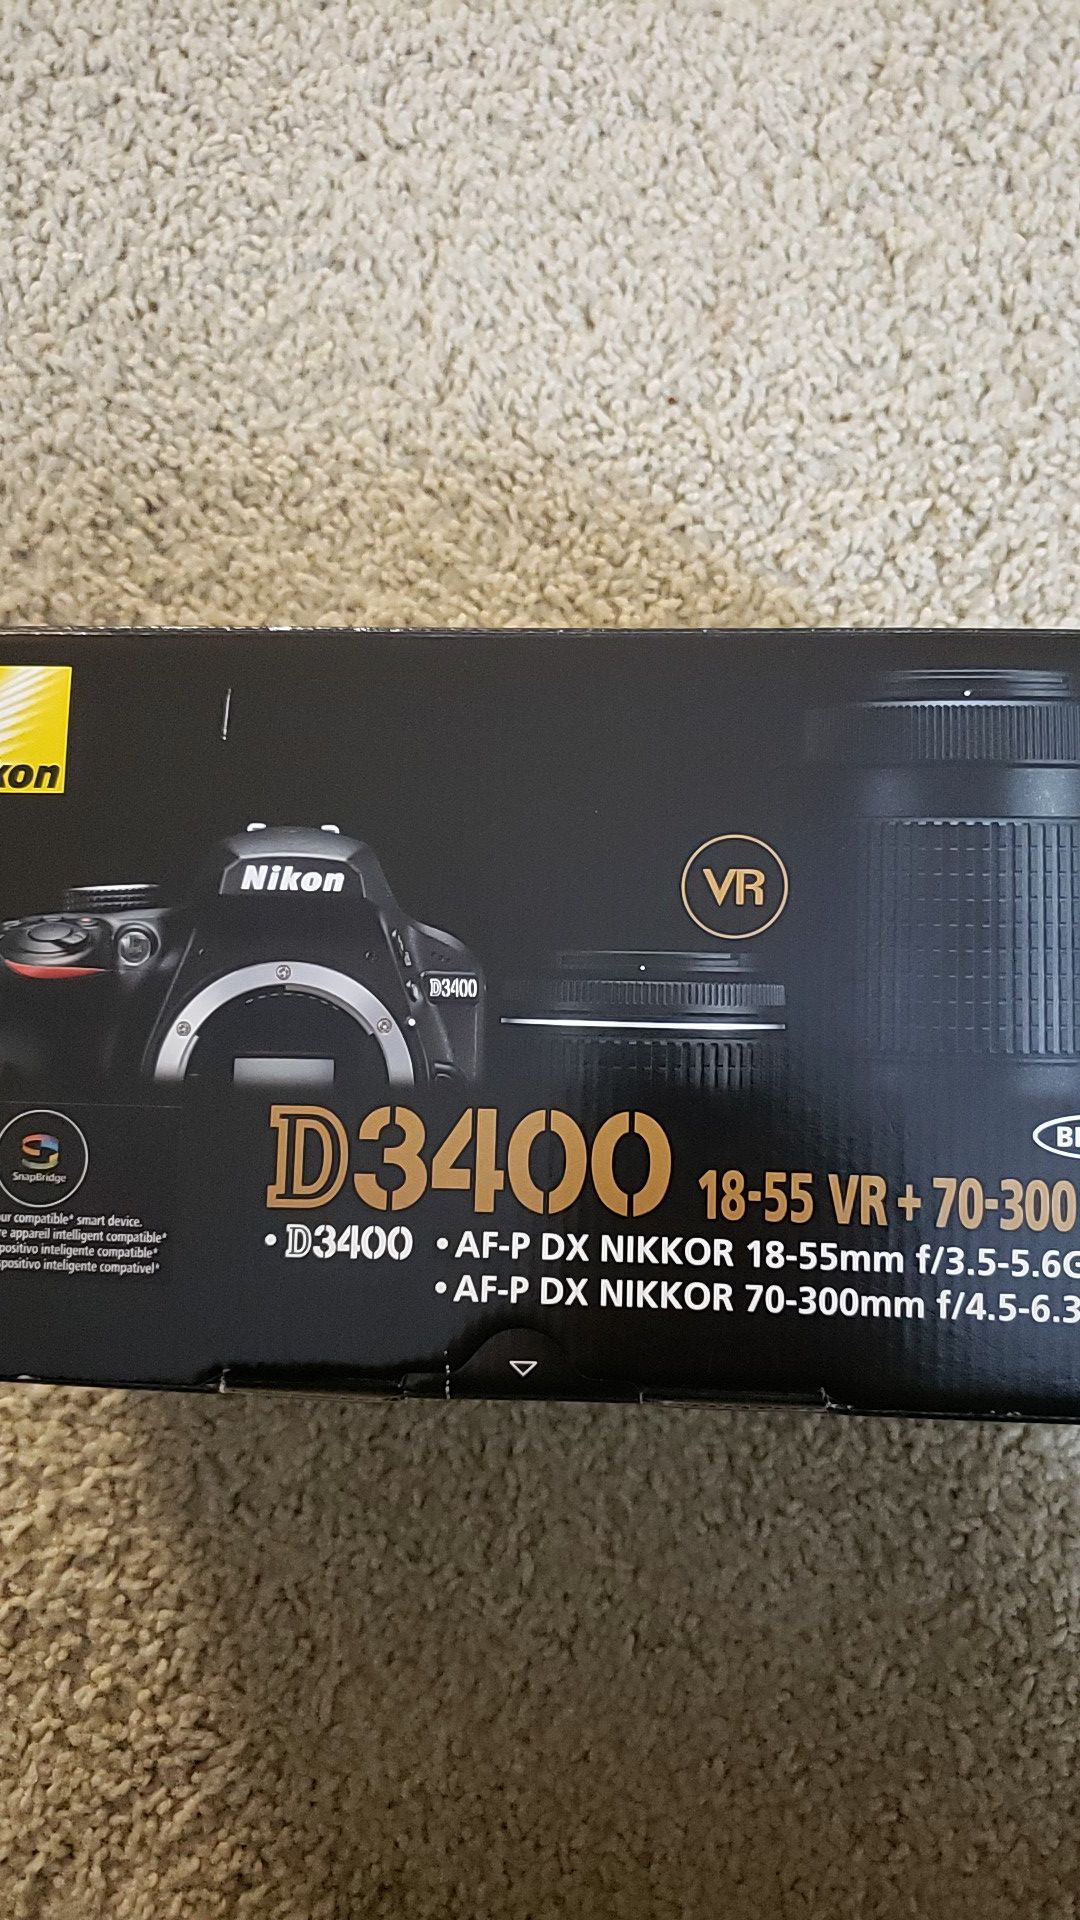 Brand New Nikon D3400 Digital SLR Camera with 24.2 Megapixels and 18-55mm and 70-300mm Lenses Included